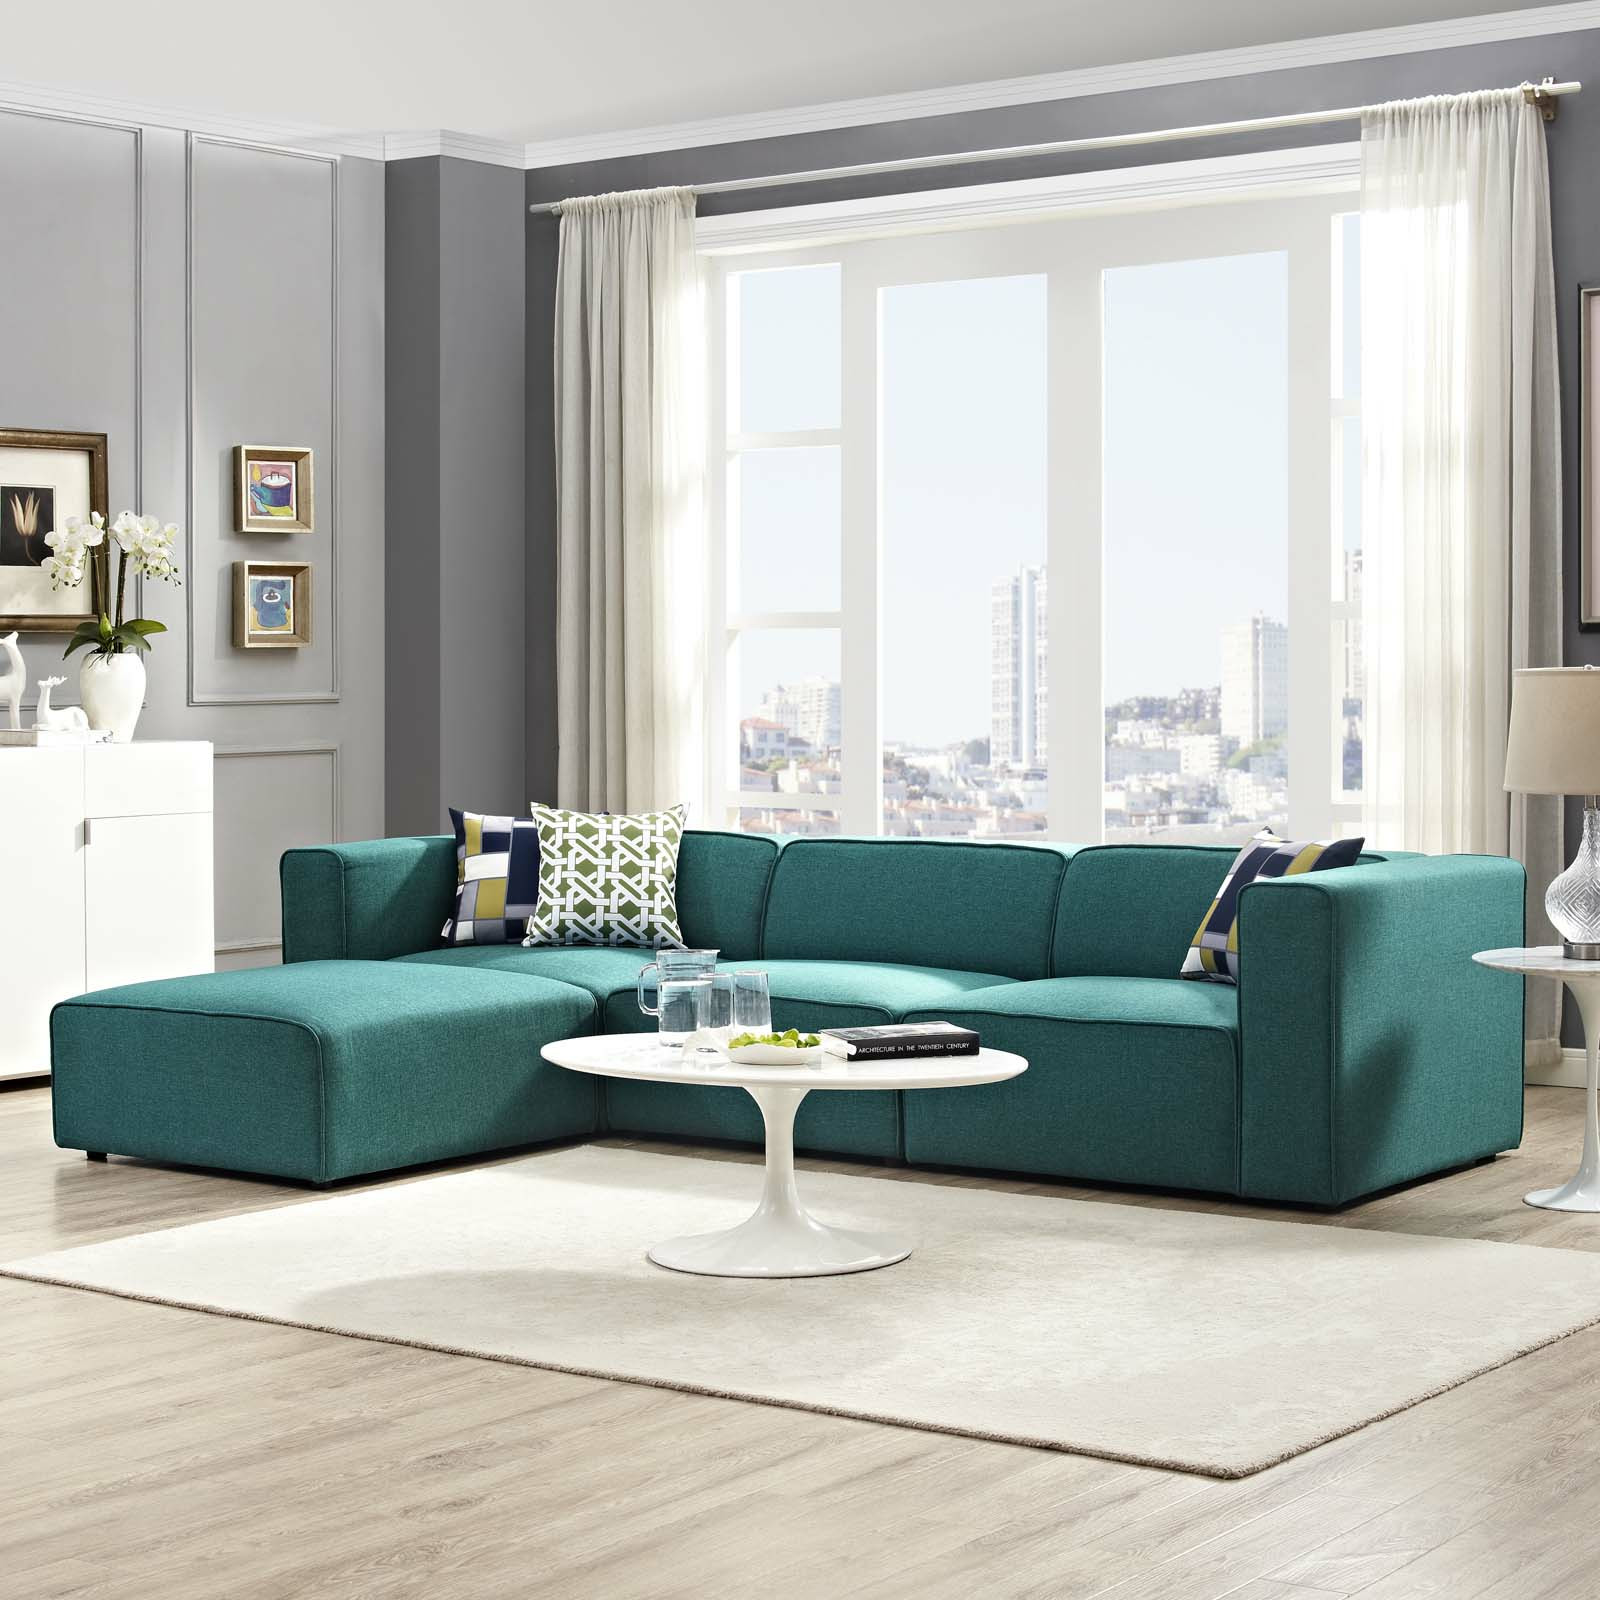 Modern Living Room Couch
 Modern & Contemporary Living Room Furniture